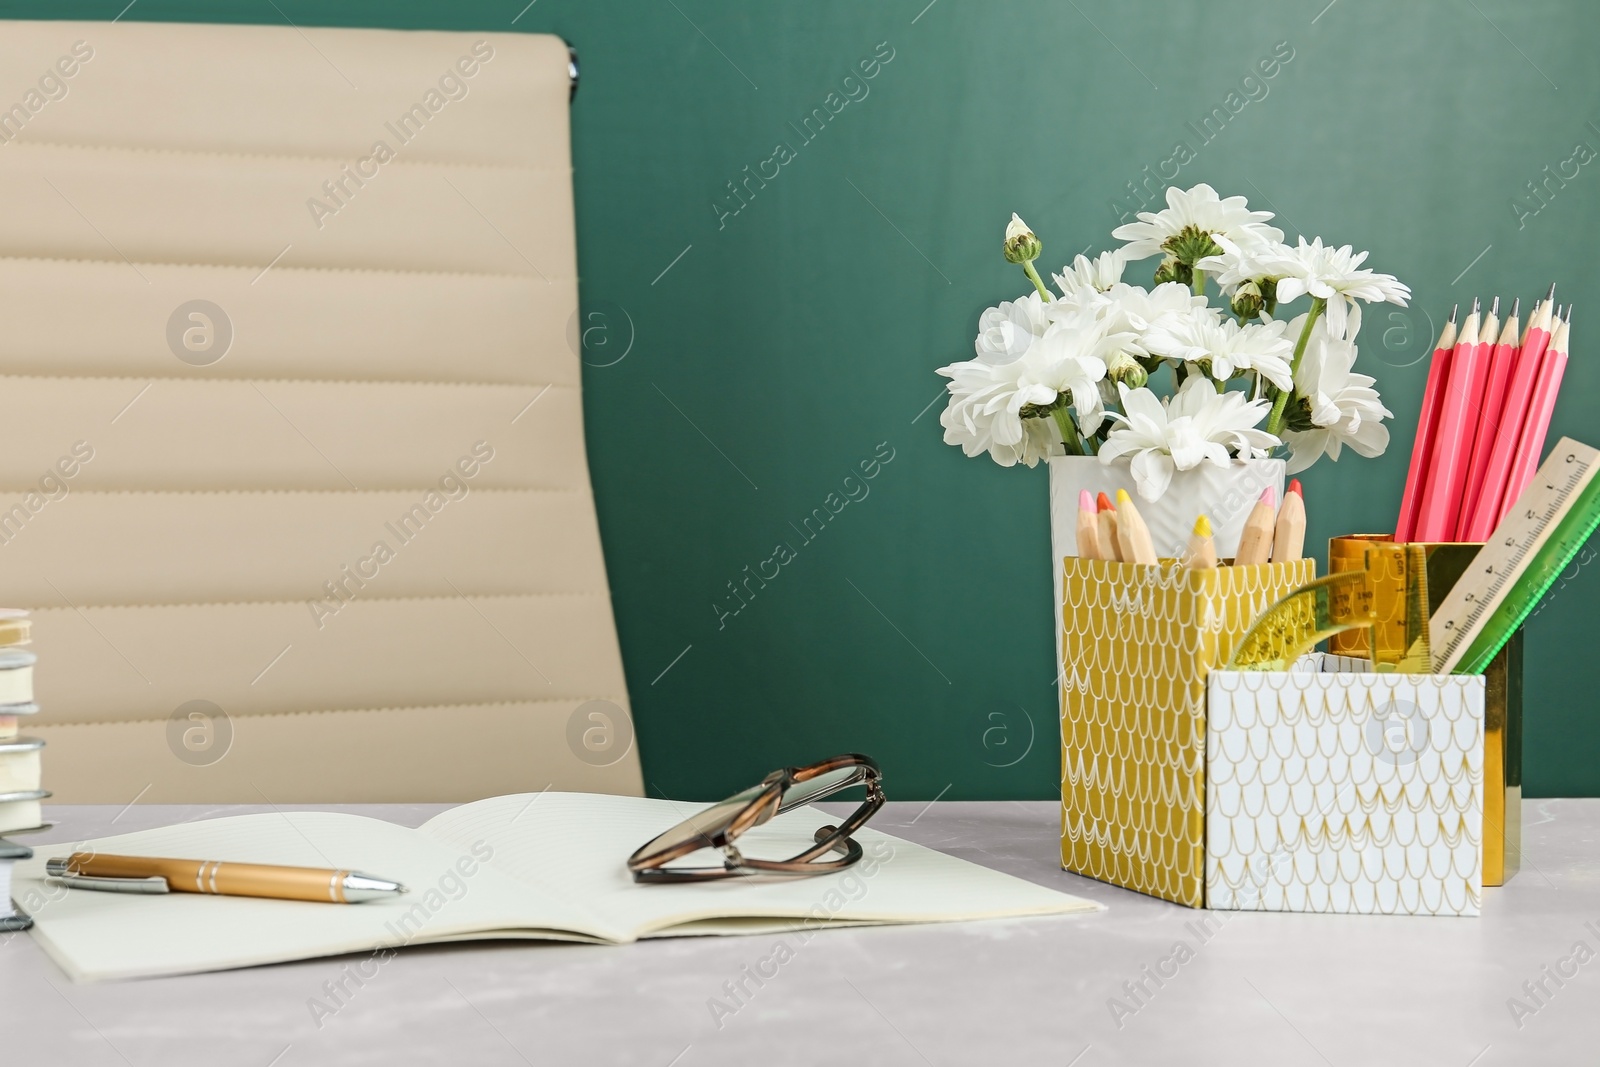 Photo of Flowers and stationery on table near chalkboard in classroom. Happy teacher's day